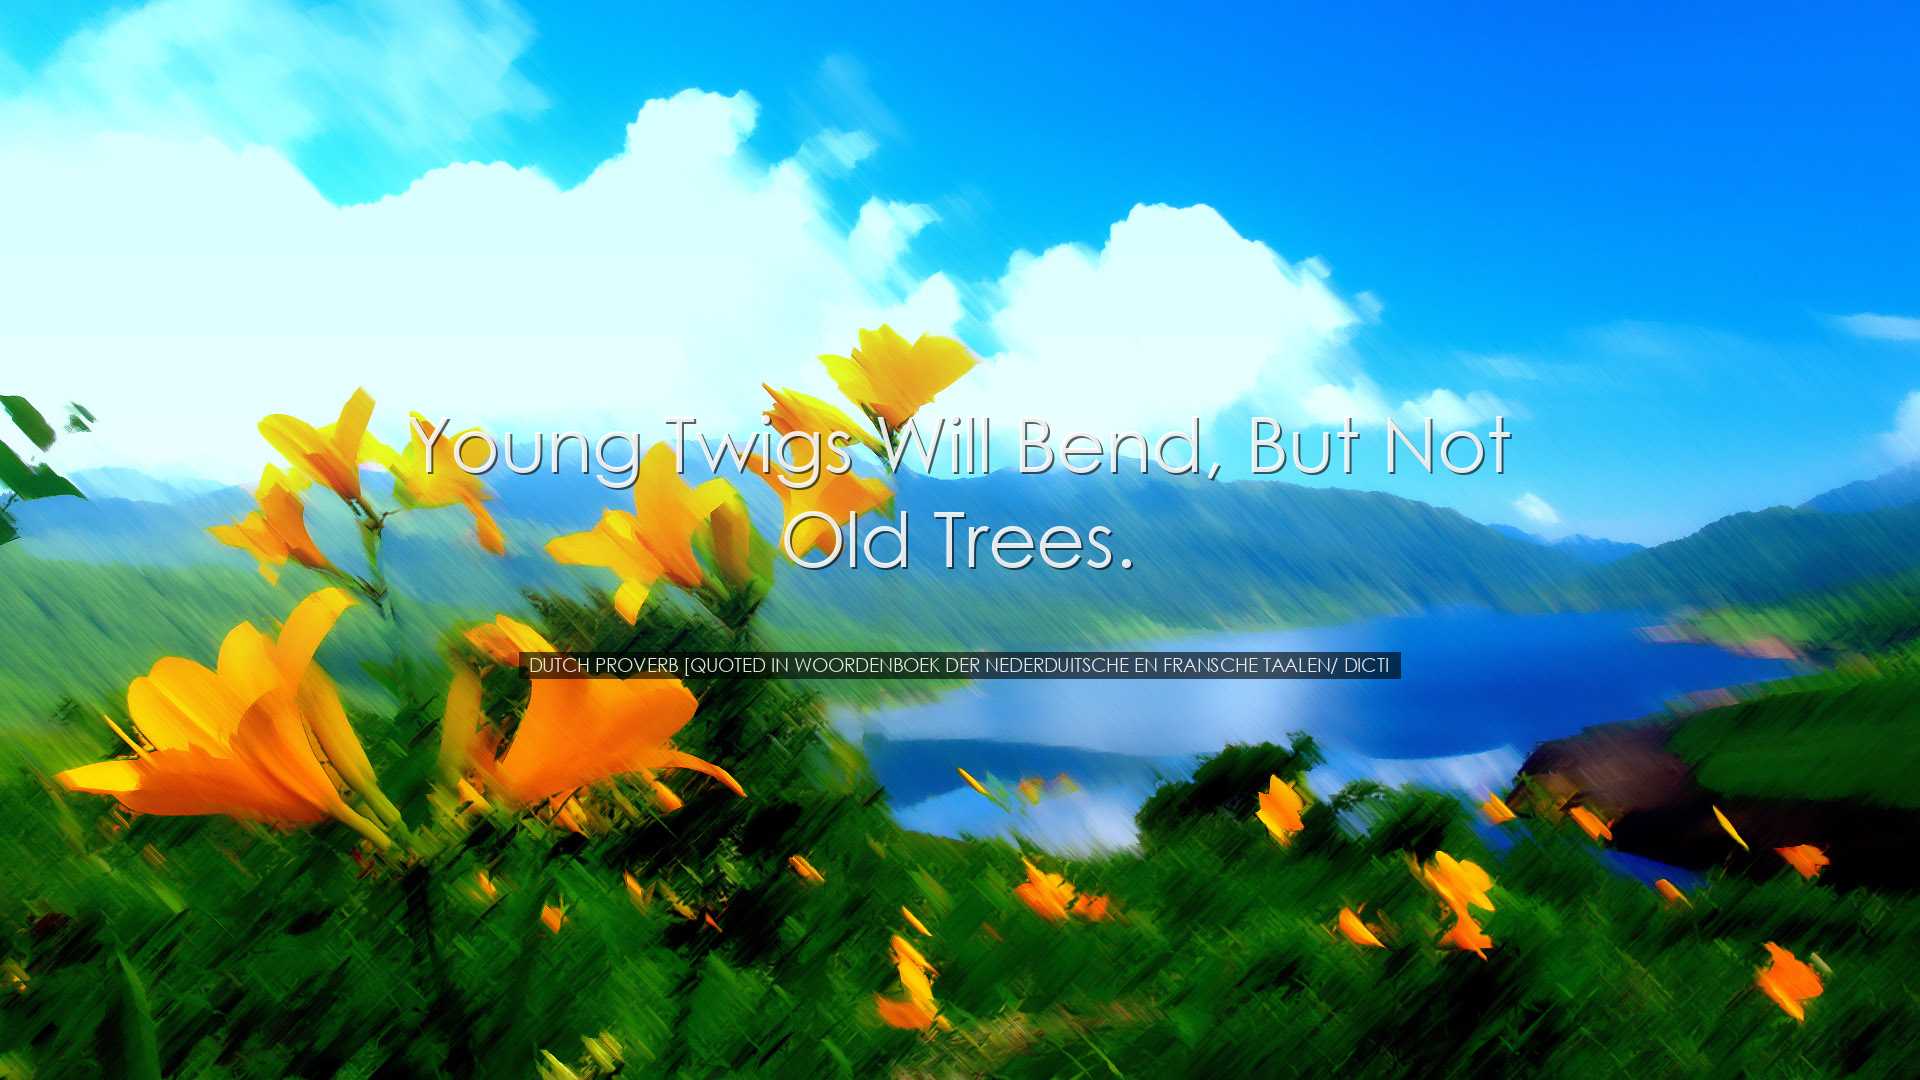 Young twigs will bend, but not old trees. - Dutch Proverb [Quoted